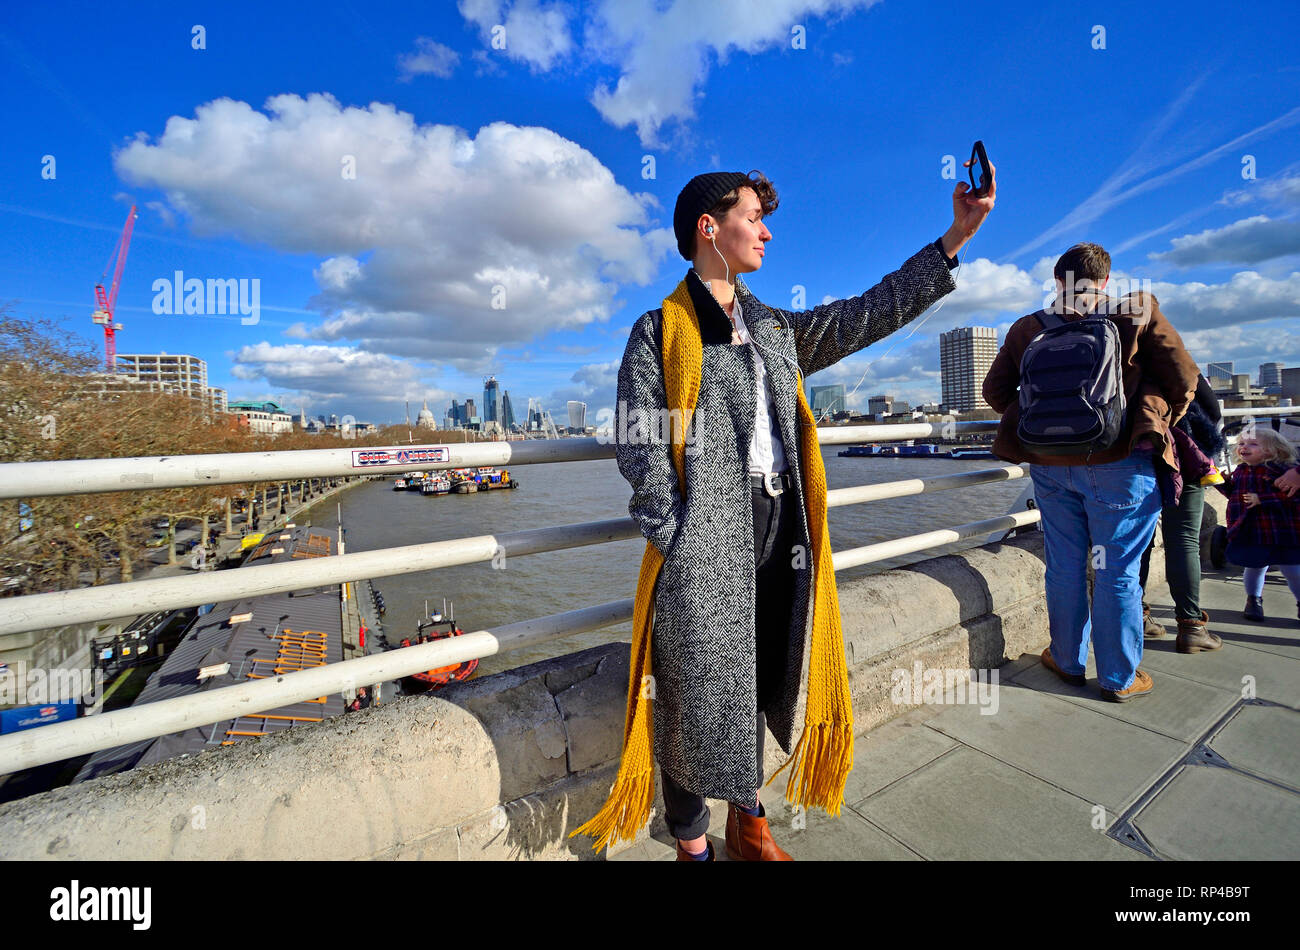 London, England, UK. Young woman taking a selfie on Waterloo Bridge on a sunny day in February 2019 Stock Photo